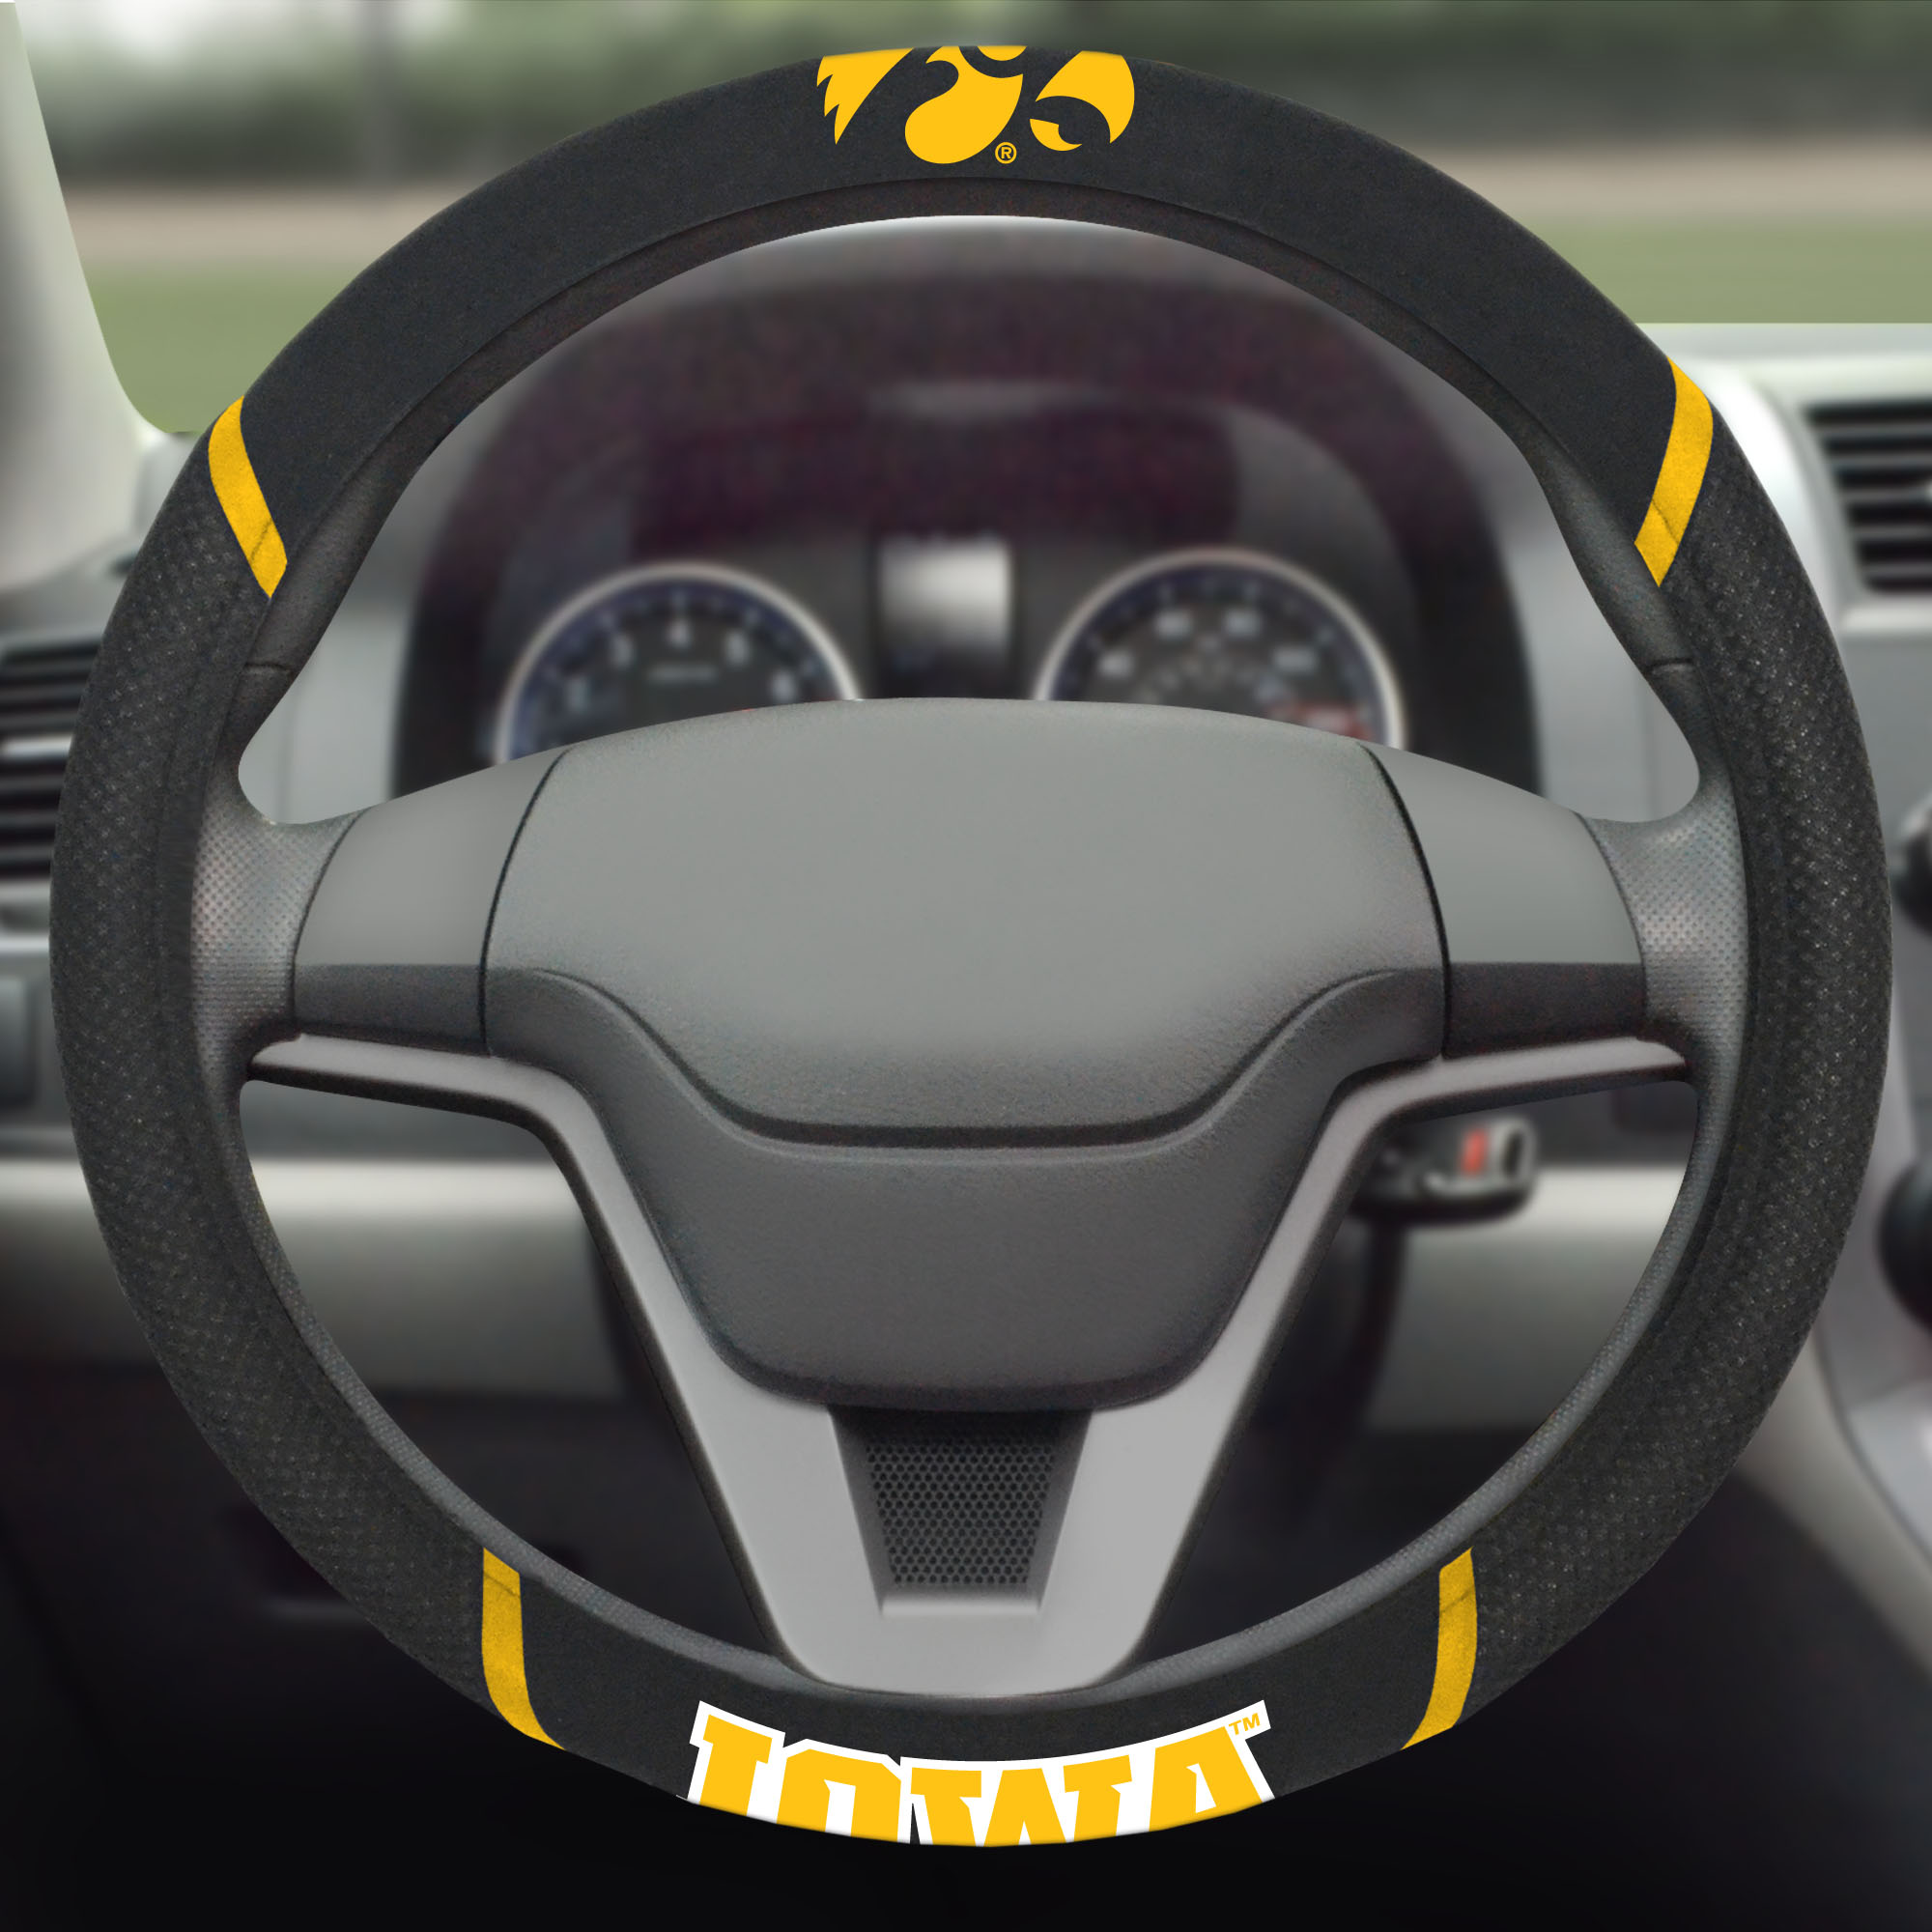 14903 Fanmats College NCAA University of Iowa 15 Inch x 15 Inch soft grippy mesh embroidered team logo washable Automotive Accessory vehicle Car Steering Wheel Cover - image 2 of 5